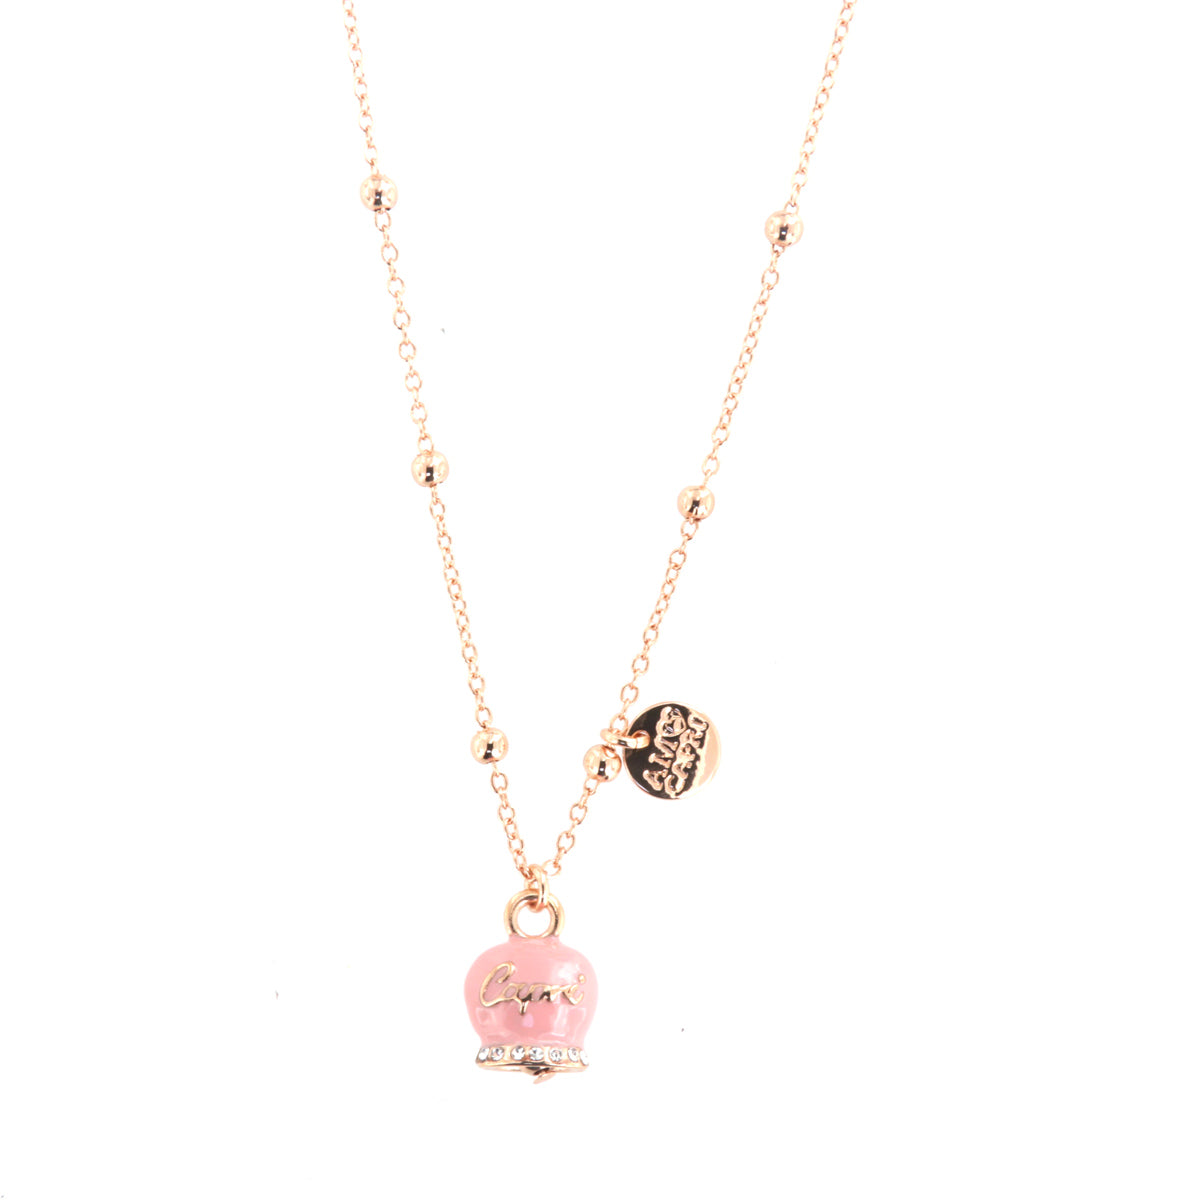 Metal necklace with a bouncing bille pendant embellished with pink enamel and crystals